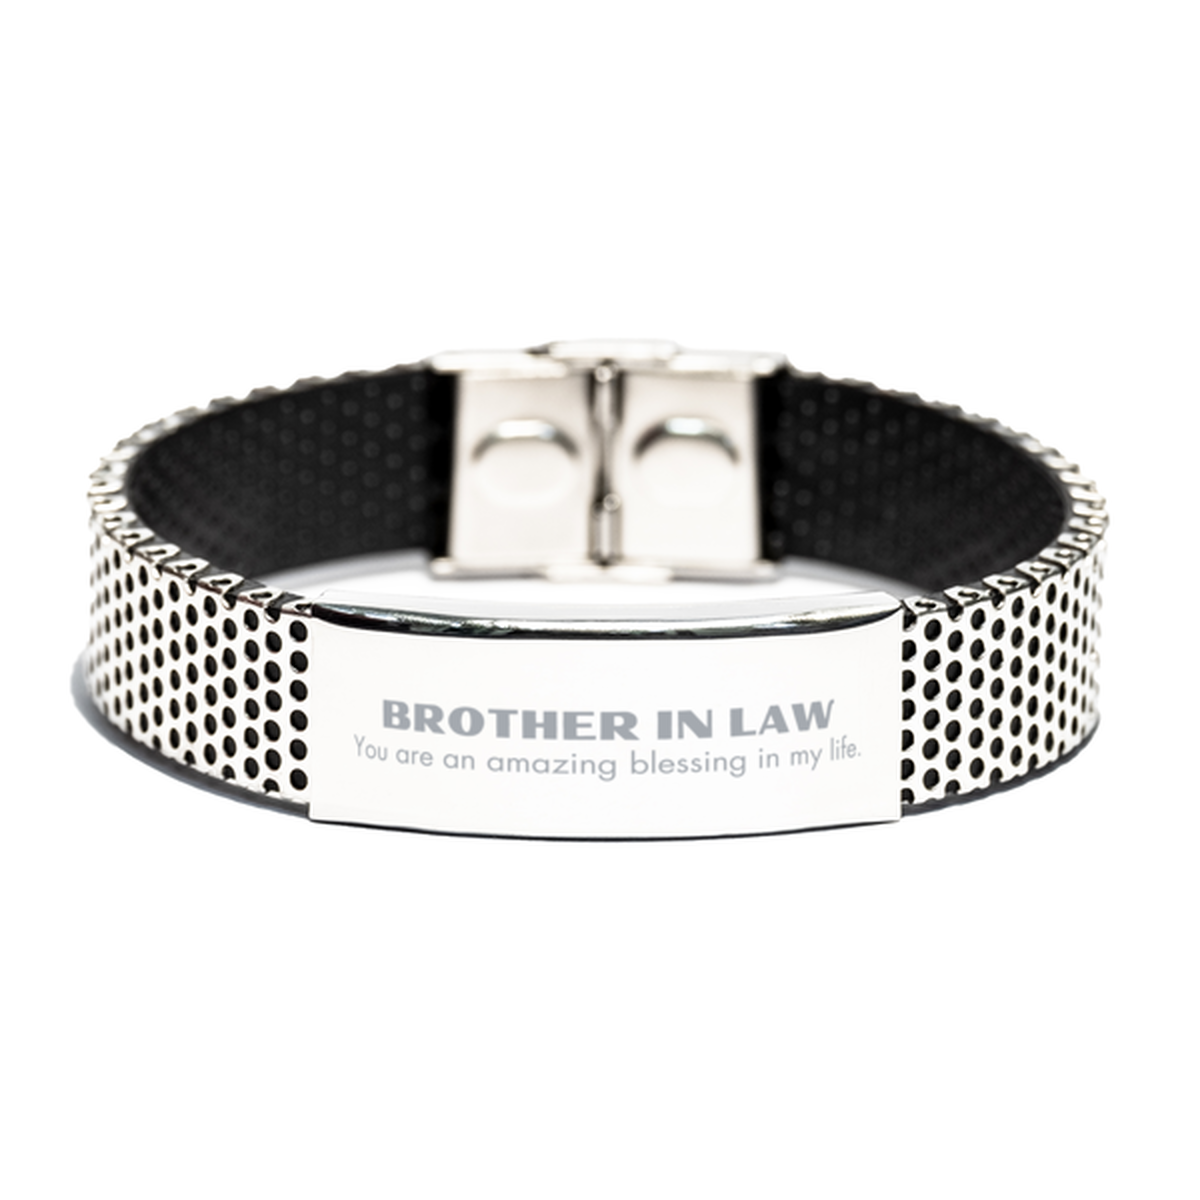 Brother In Law Stainless Steel Bracelet, You are an amazing blessing in my life, Thank You Gifts For Brother In Law, Inspirational Birthday Christmas Unique Gifts For Brother In Law